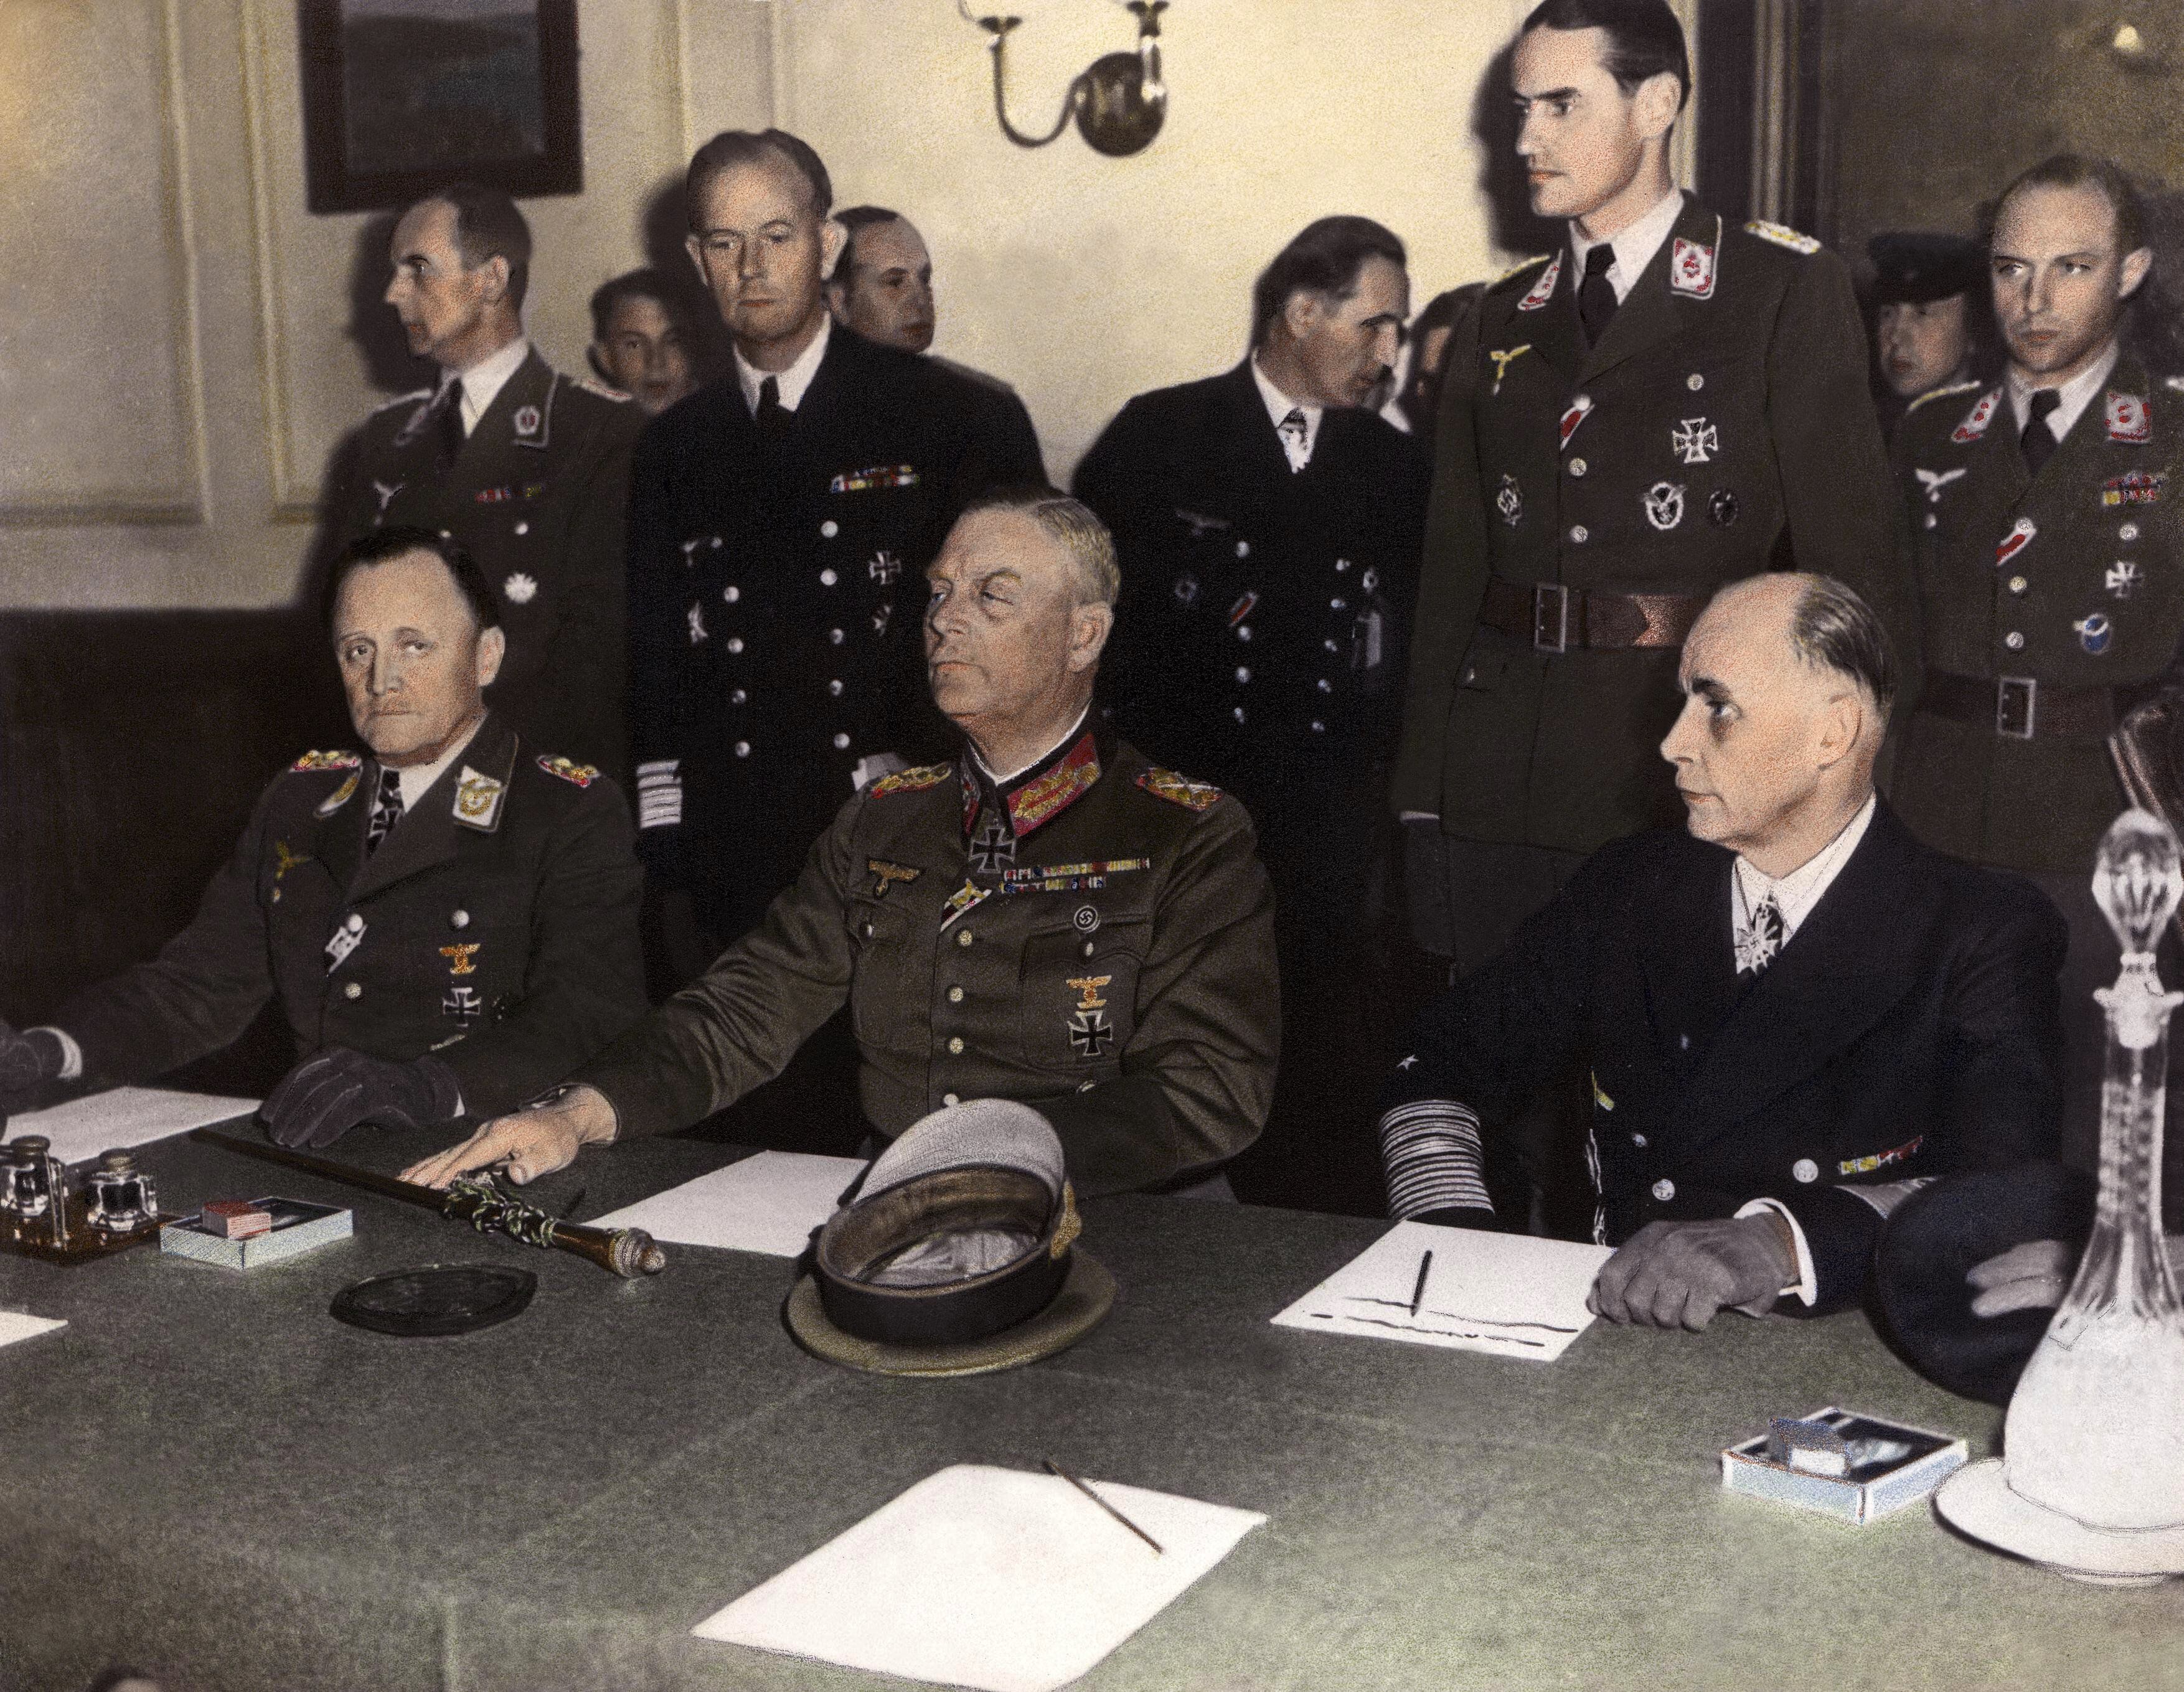 Signing of the German surrender act at the Russian headquarters in Karlshortst, northeast of Berlin.  (KEYSTONE-FRANCE/GAMMA-KEYSTONE VIA GETTY IMAGES).